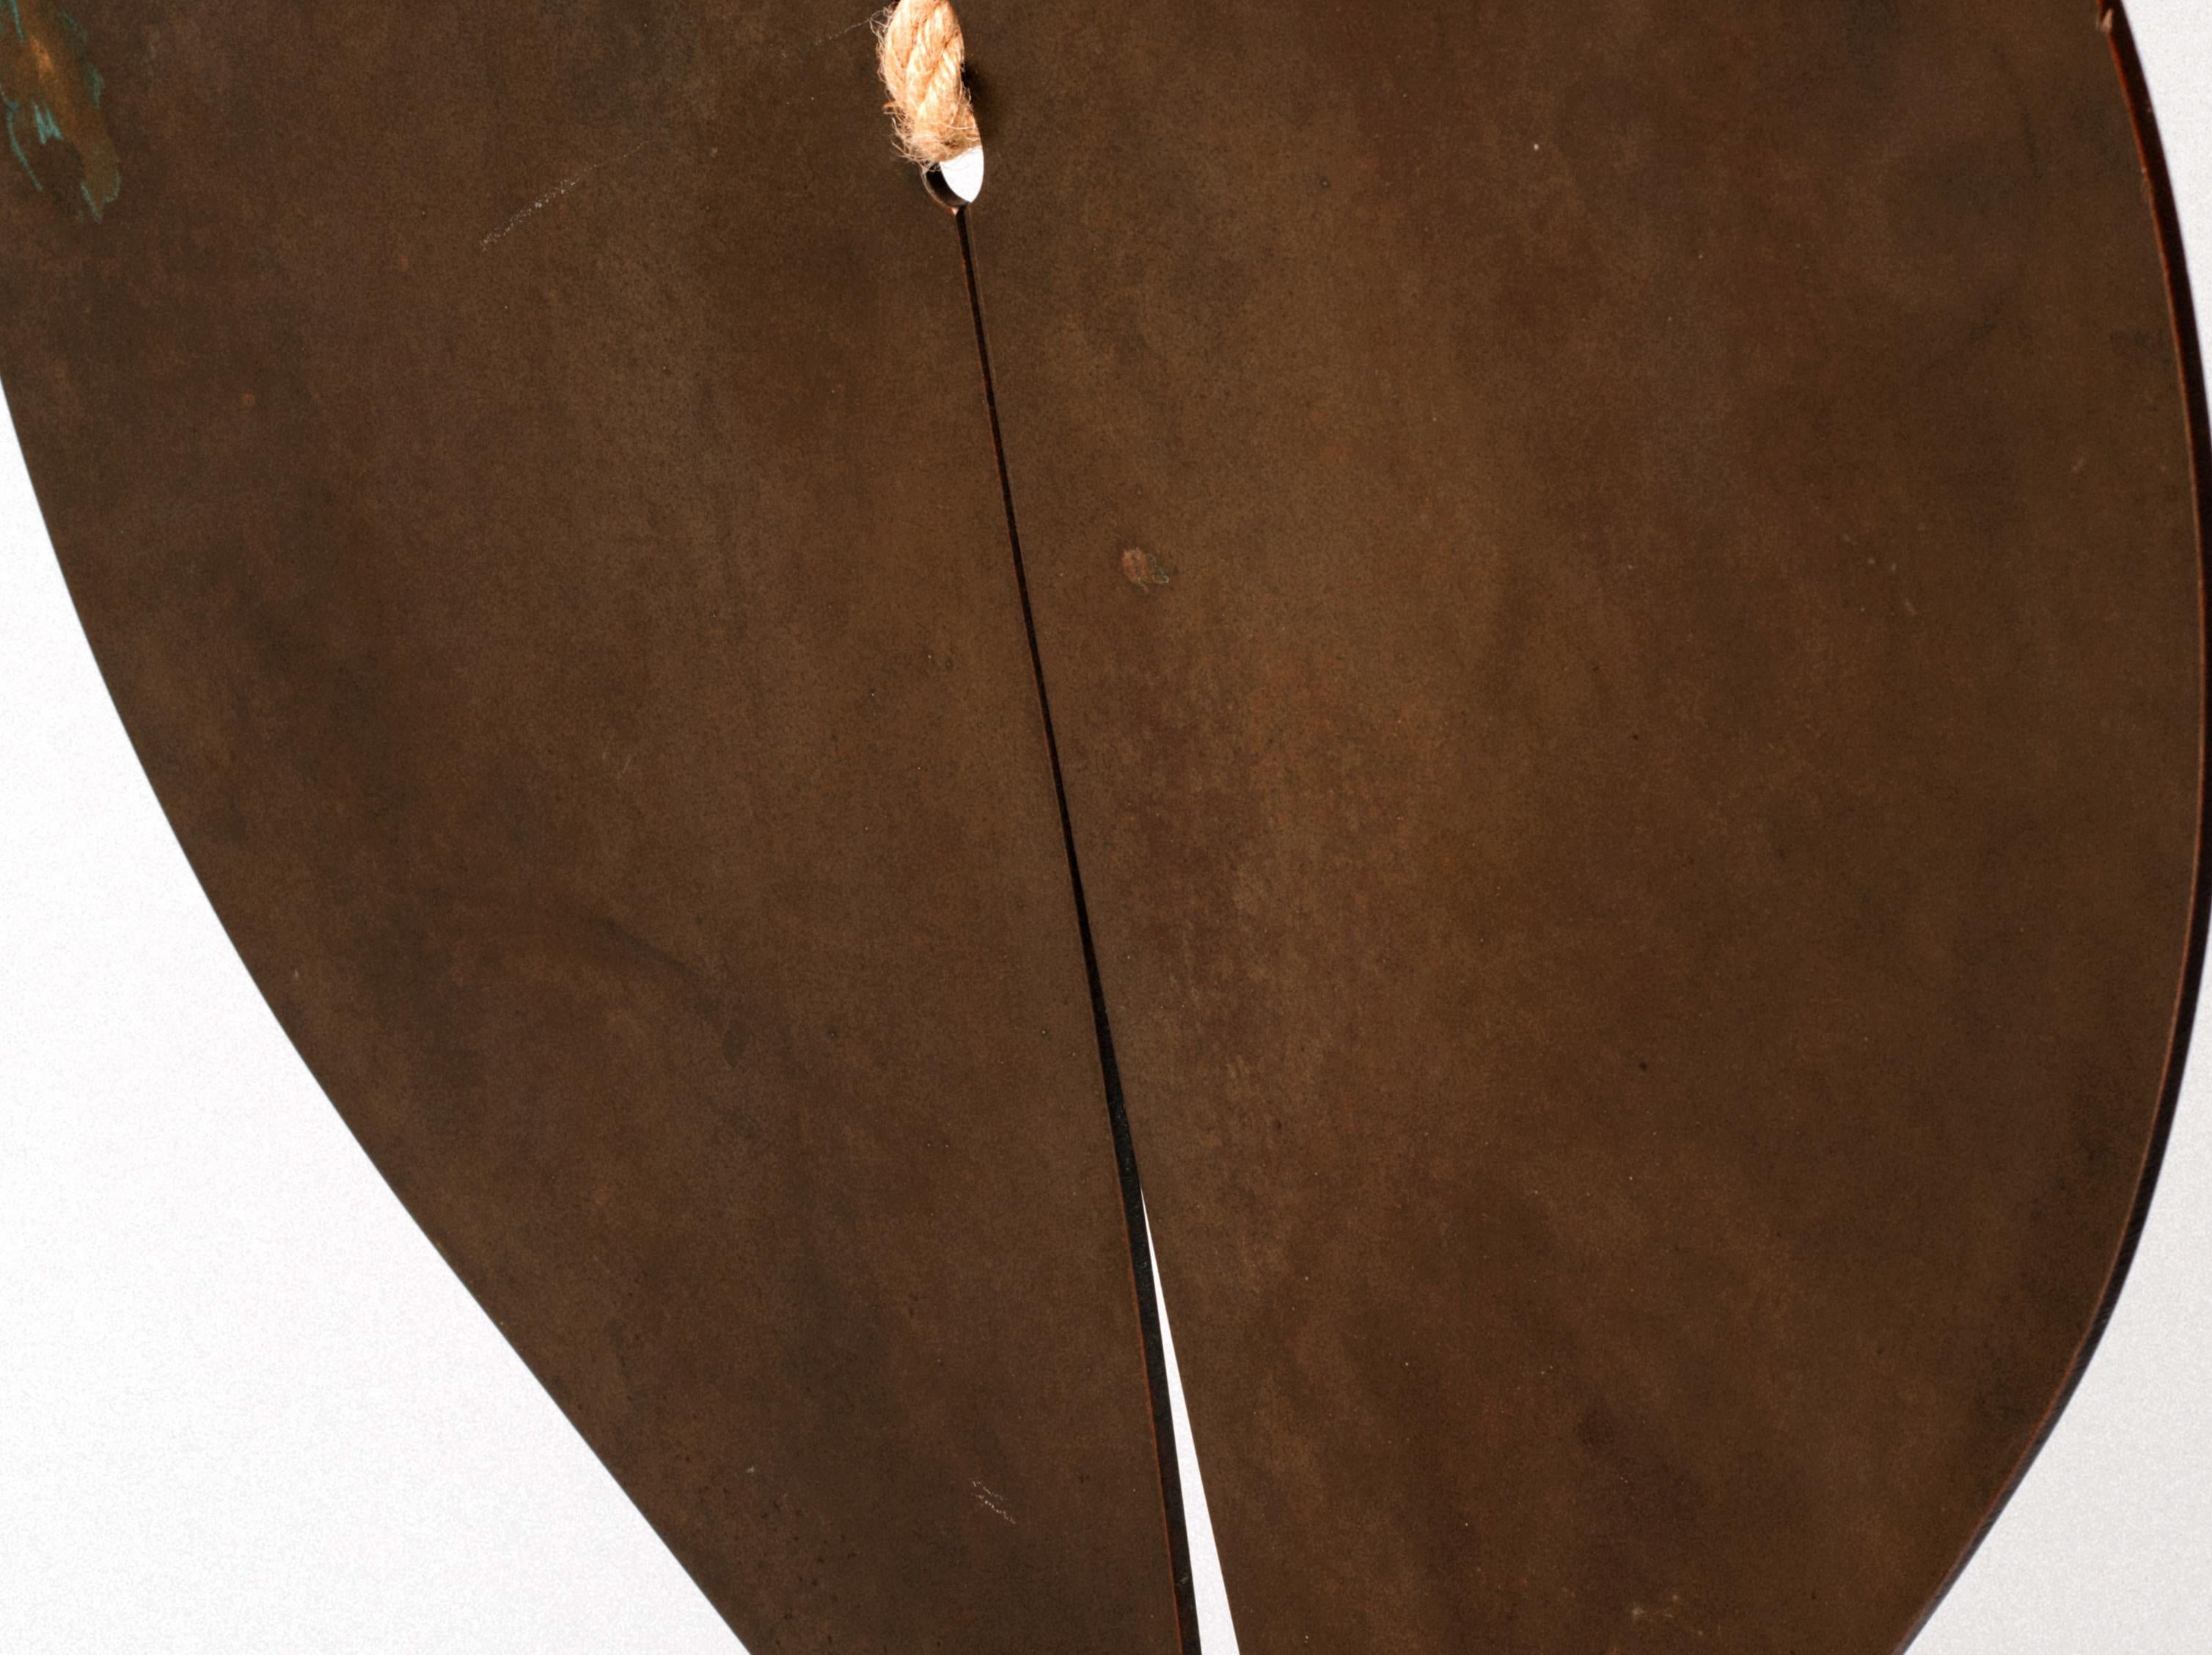 Hammered Harry Bertoia Untitled Suspended Gong Sculpture with COA, circa 1975